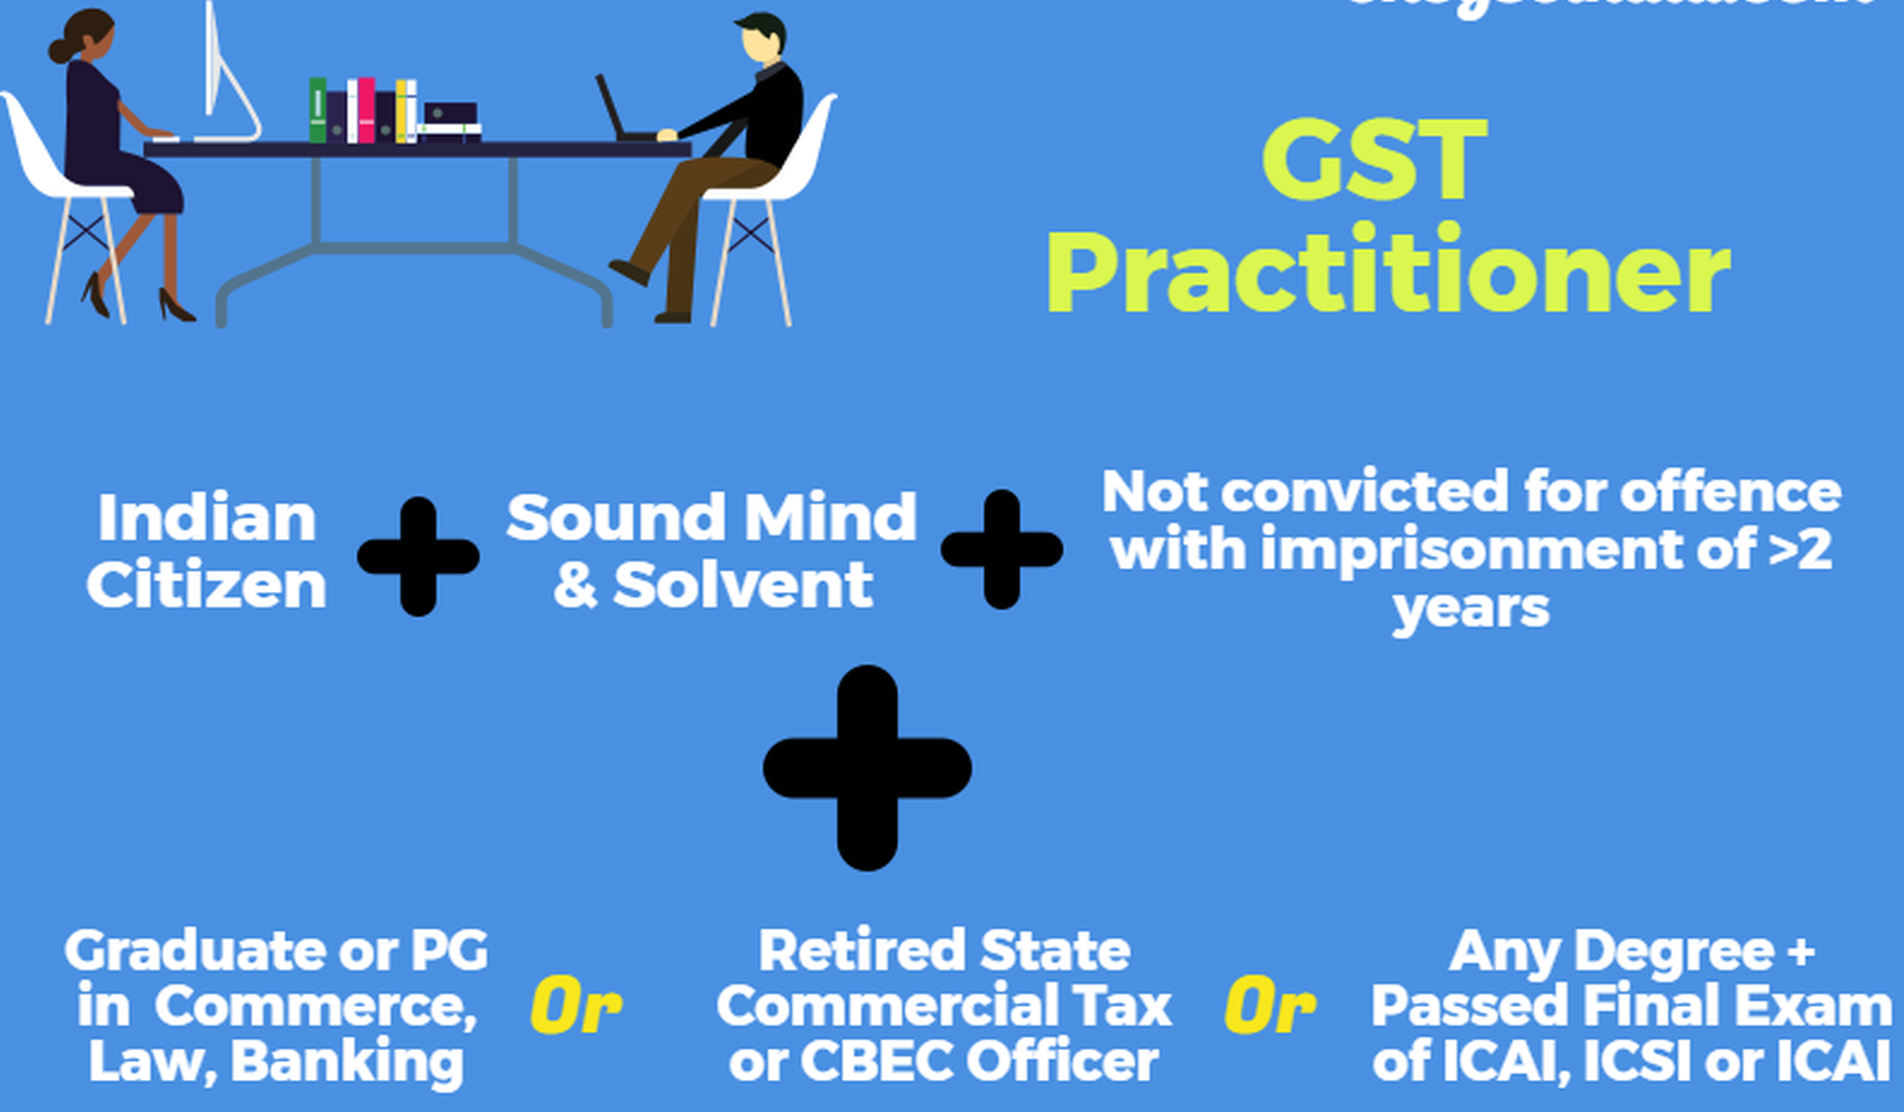 Scope and Trends in GST